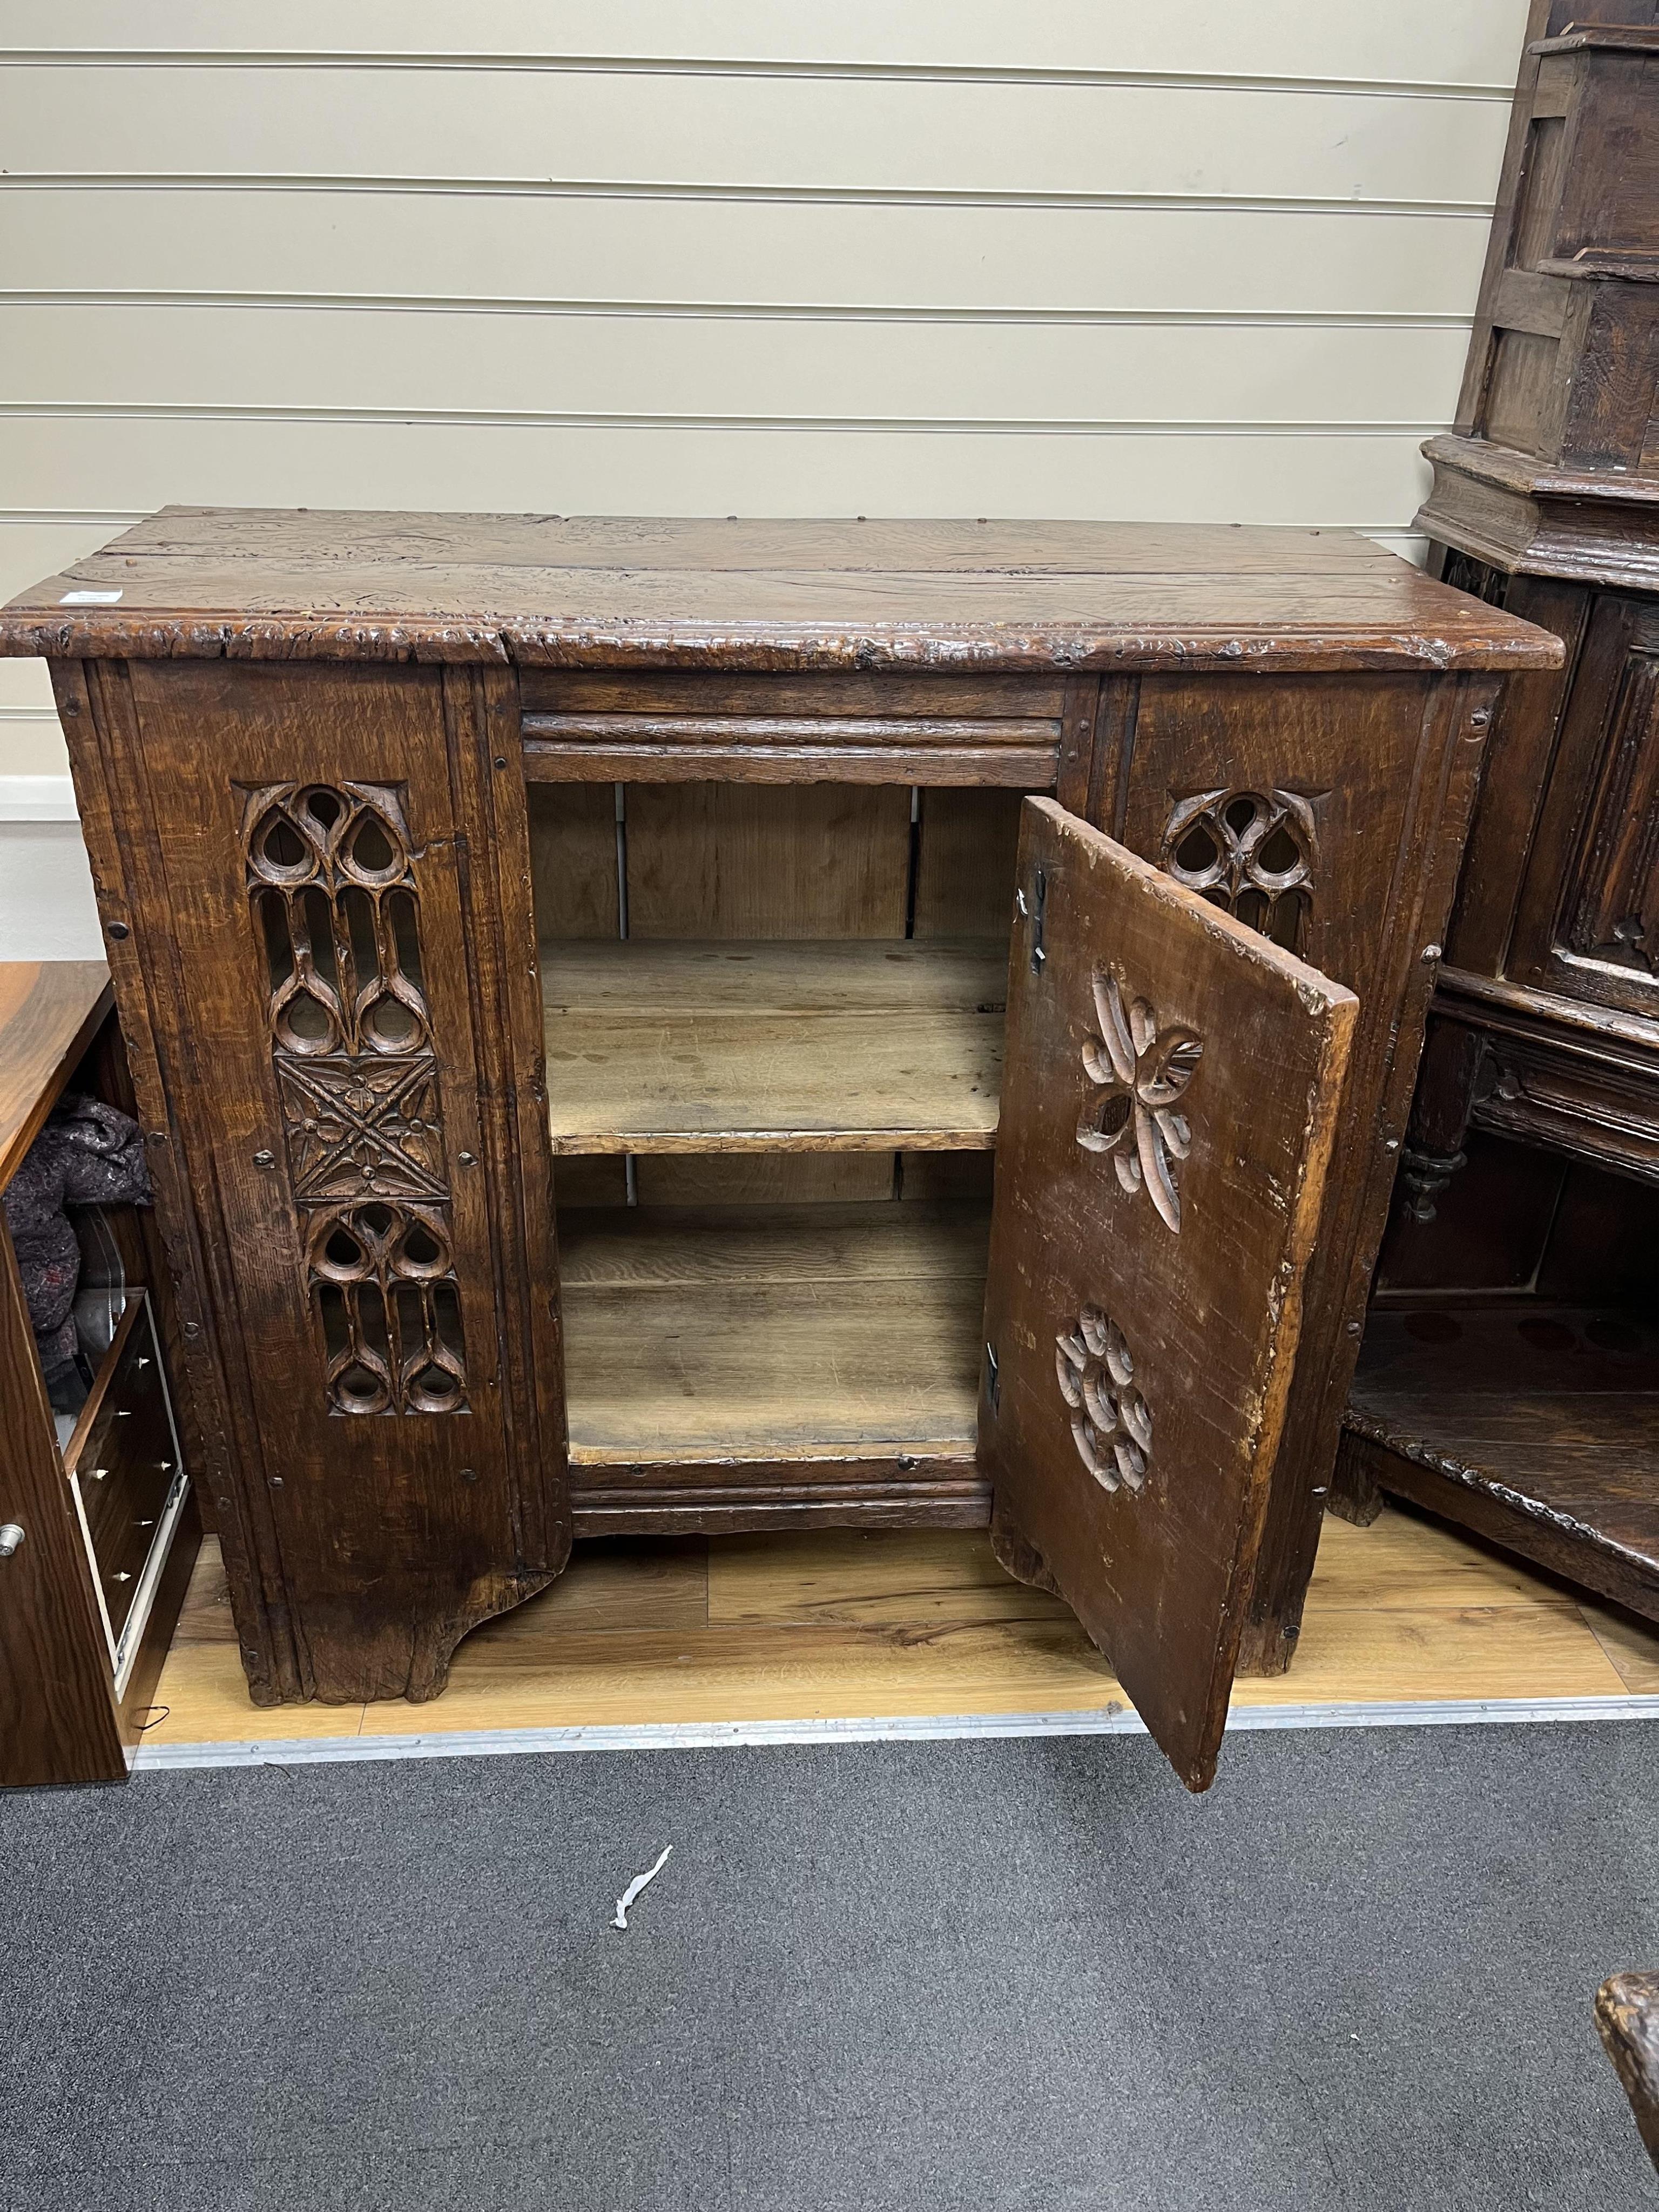 A Gothic boarded oak aumbry, with pierced fretwork panels, in late 15th century style, width 119cm, depth 54cm, height 114cm. Condition - good, Provenance - made for Brede Place, Brede, Rye, East Sussex. Commissioned fro